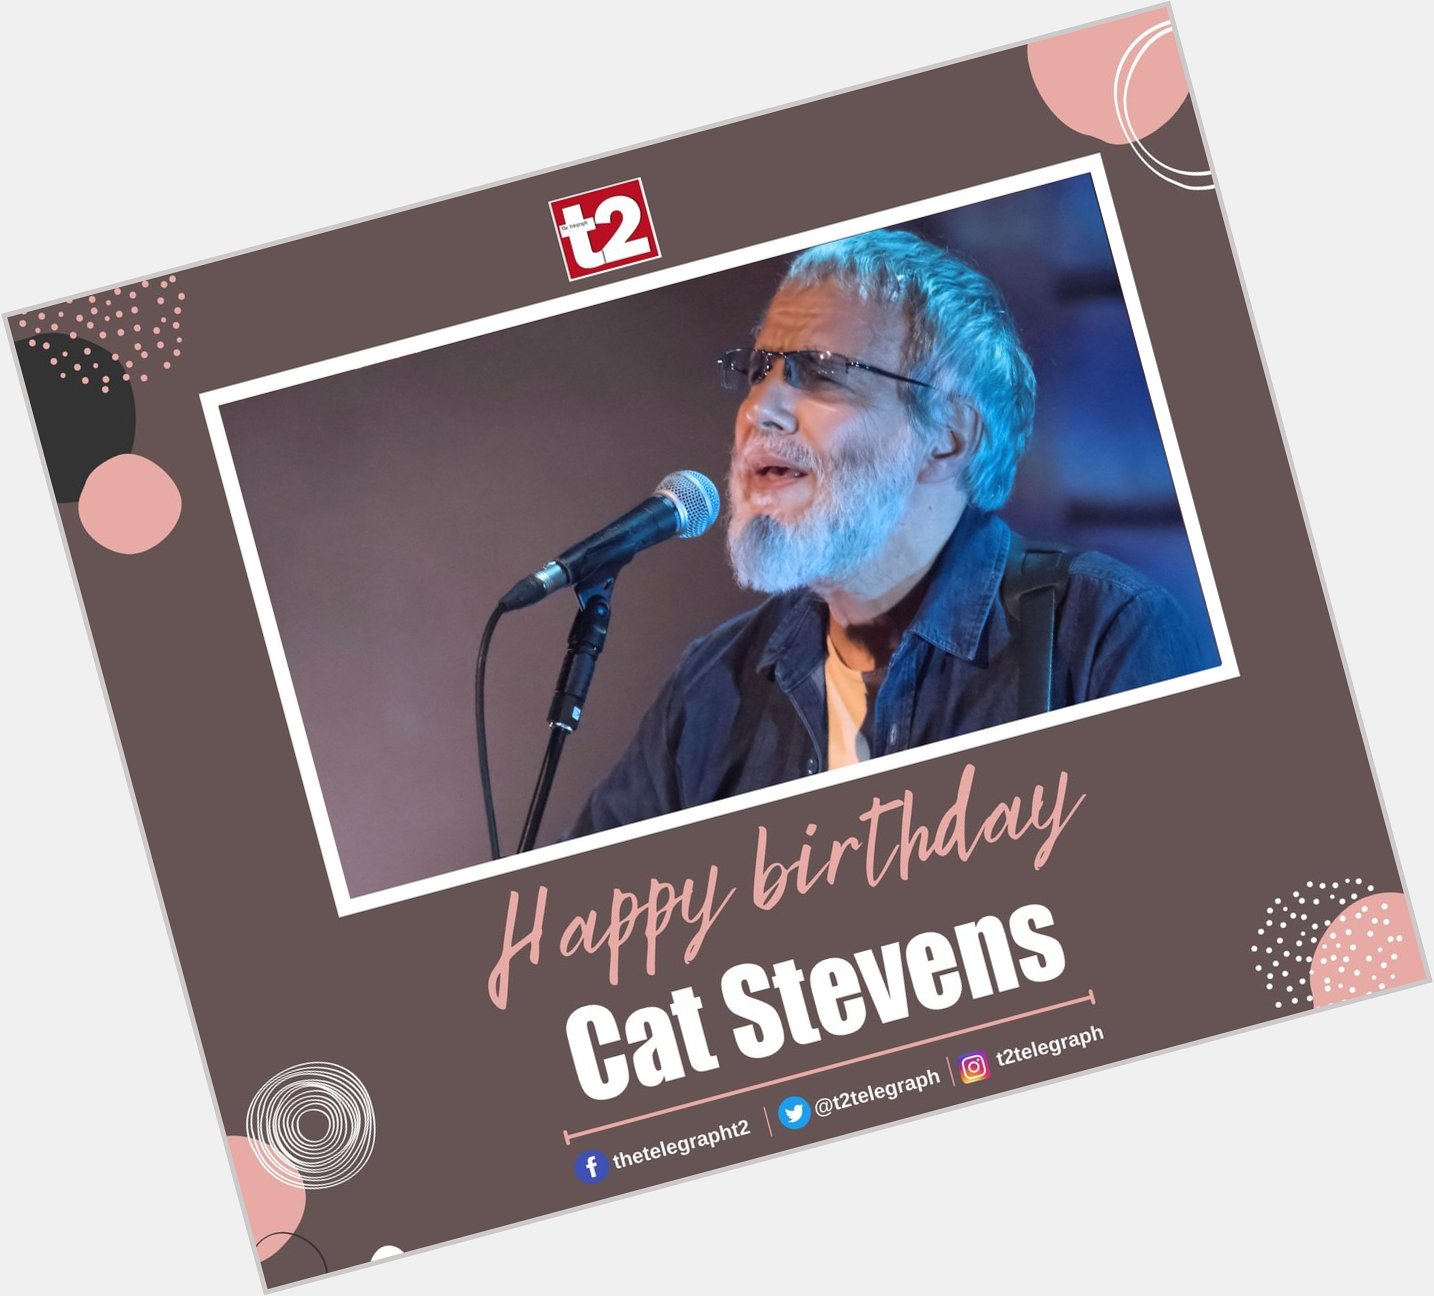 His music is about nostalgia, peace and love. Happy birthday Cat Stevens, the timeless acoustic troubadour 